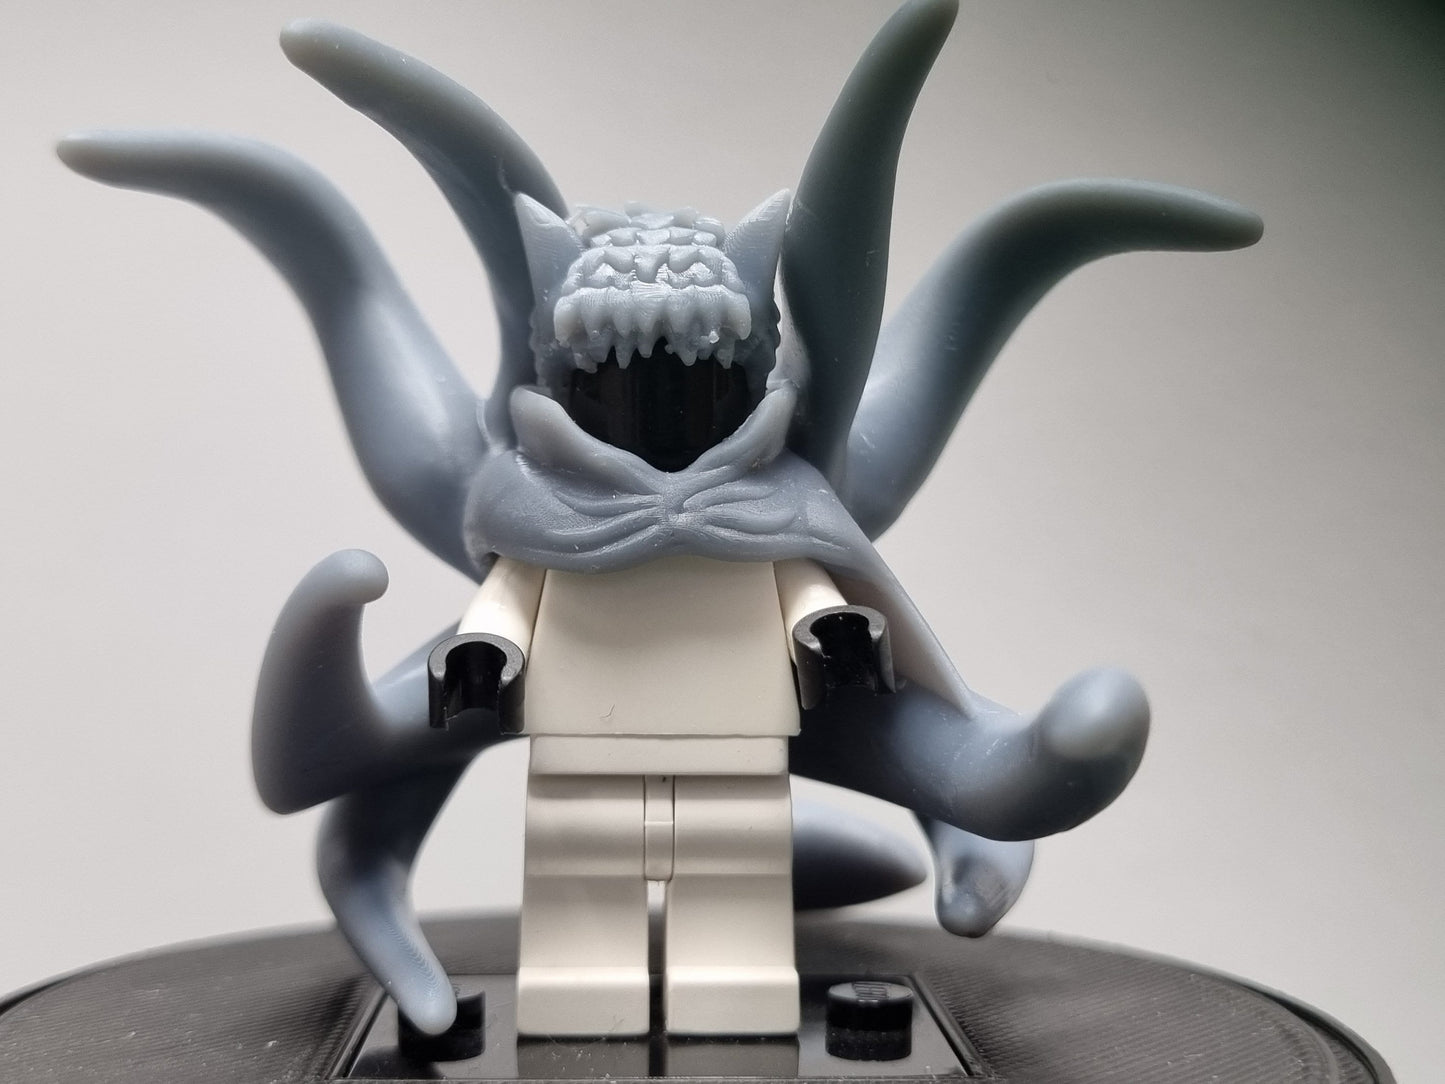 Building toy custom 3D printed tentical mode!